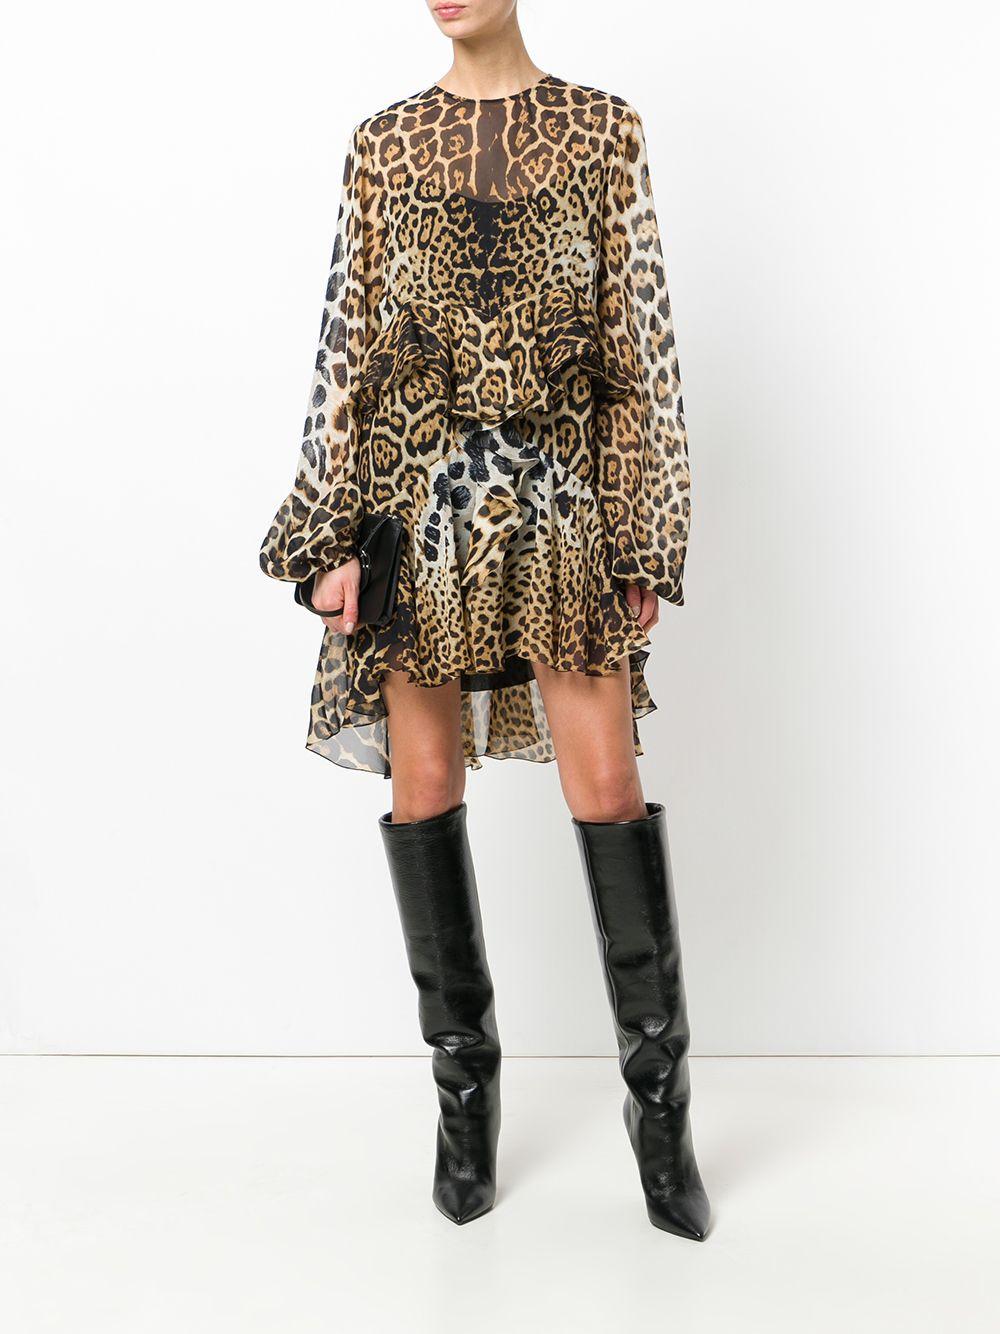 Saint Laurent Ruffles Leopard Print Silk Chiffon Long Sleeve Dress

This Saint Laurent dress features silk chiffon fabric, a leopard print, a tiered ruffles silhouette and long sleeves. It is lined. Brand new with tags. Made in Italy.

Size: 38 (FR)